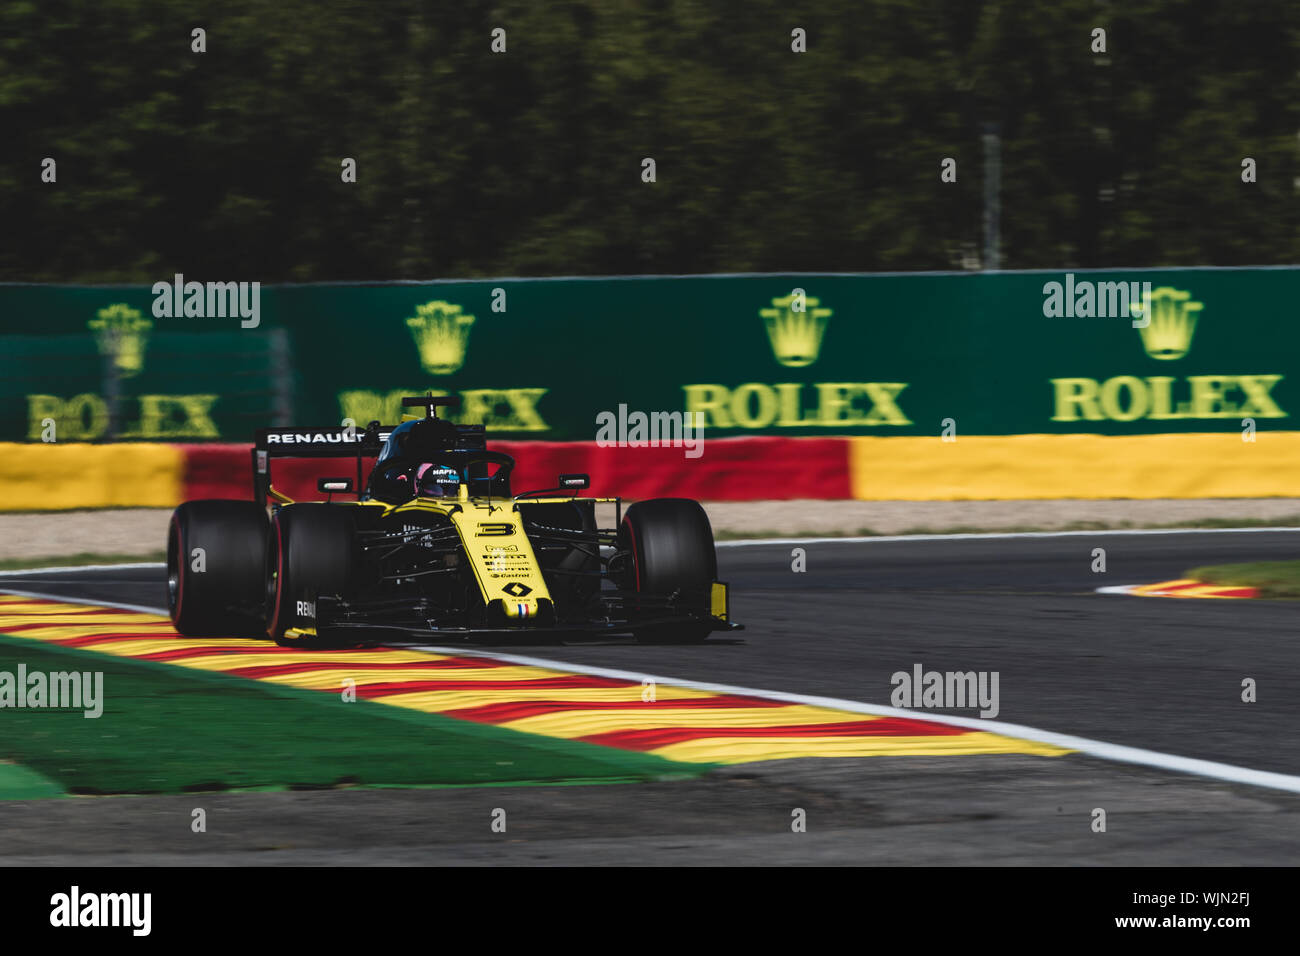 #3, Daniel Ricciardo, AUS, Renault,  in action during the Belgian Grand Prix at Spa Francorchamps Stock Photo